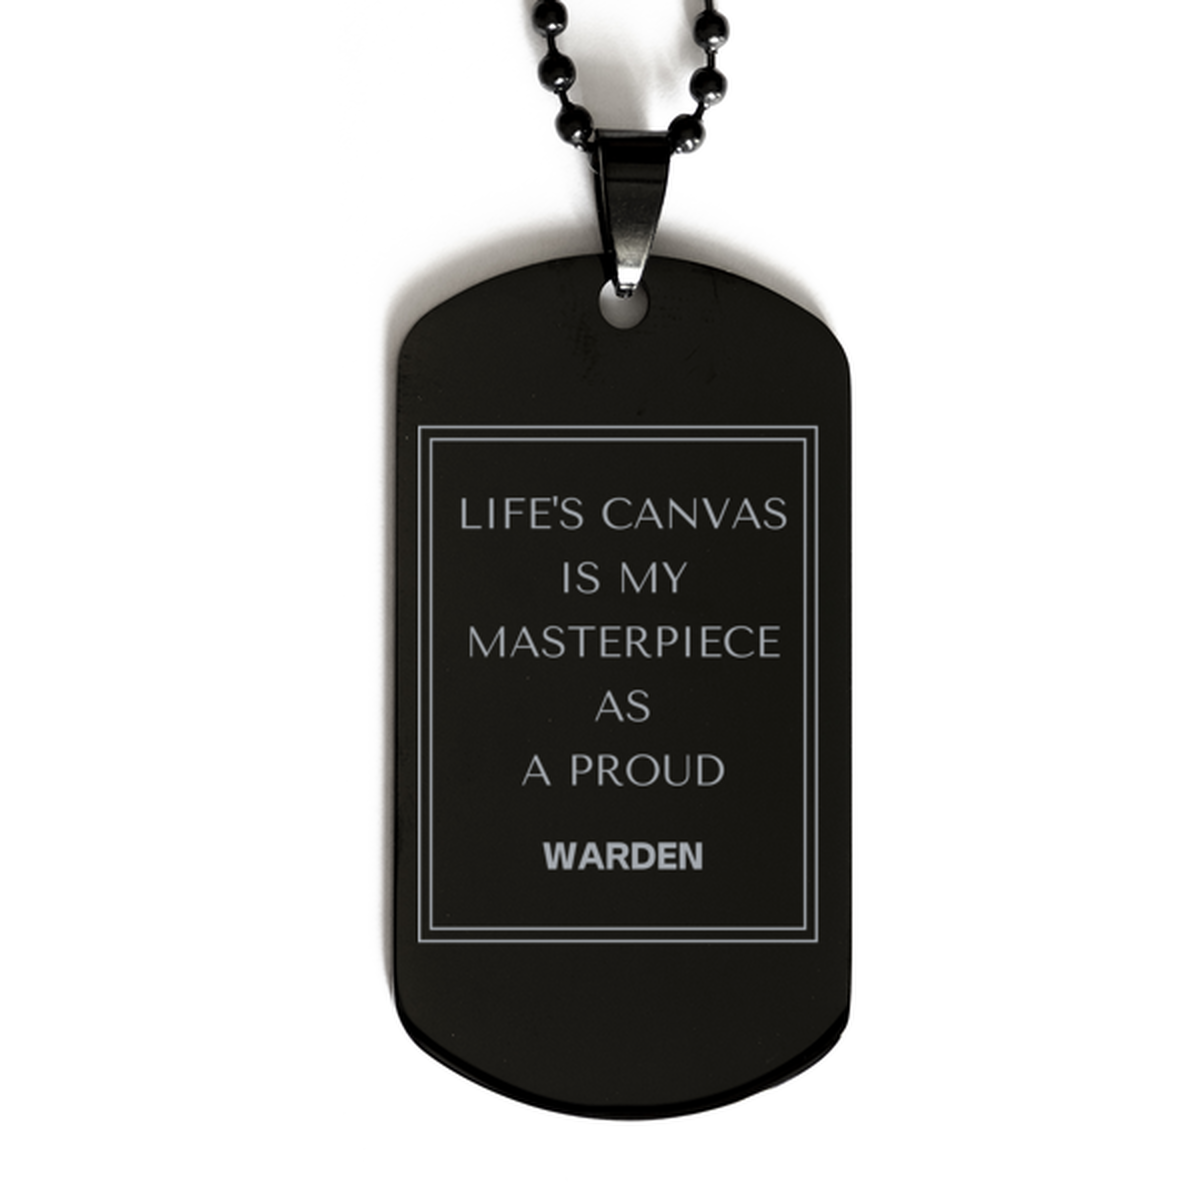 Proud Warden Gifts, Life's canvas is my masterpiece, Epic Birthday Christmas Unique Black Dog Tag For Warden, Coworkers, Men, Women, Friends